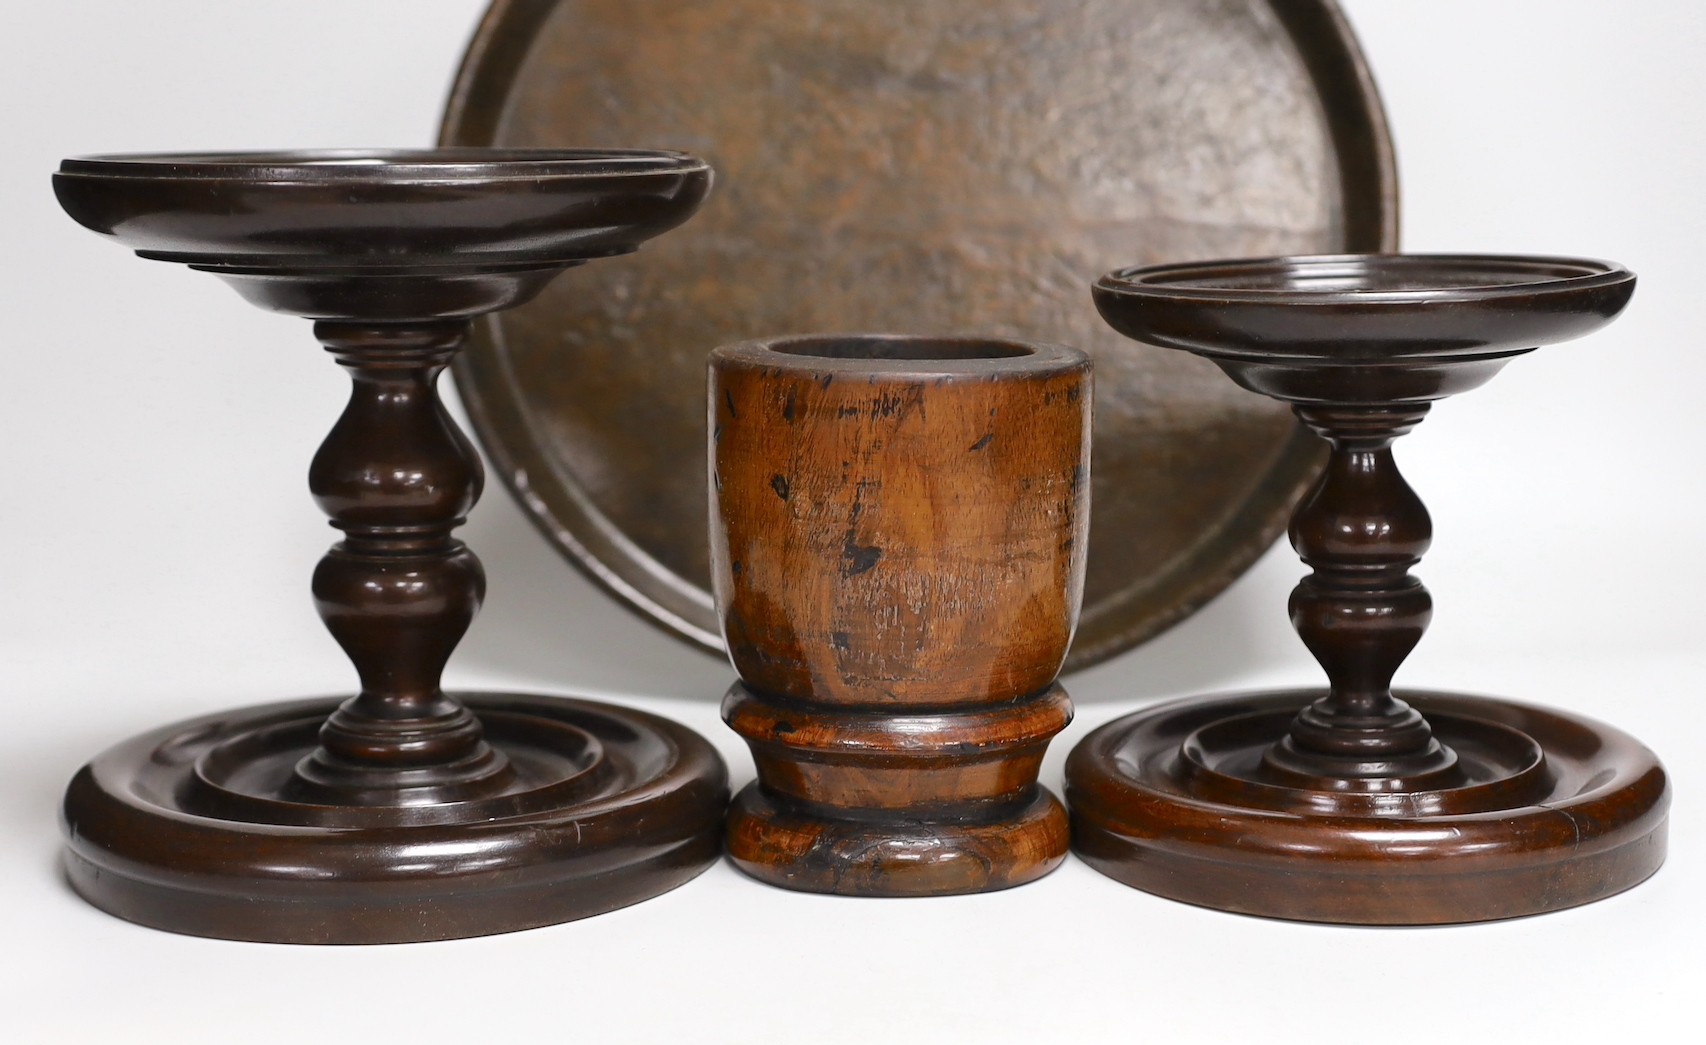 19th century and later treen including two mahogany candlestands, a spice tower and sycamore dish (6 in total)